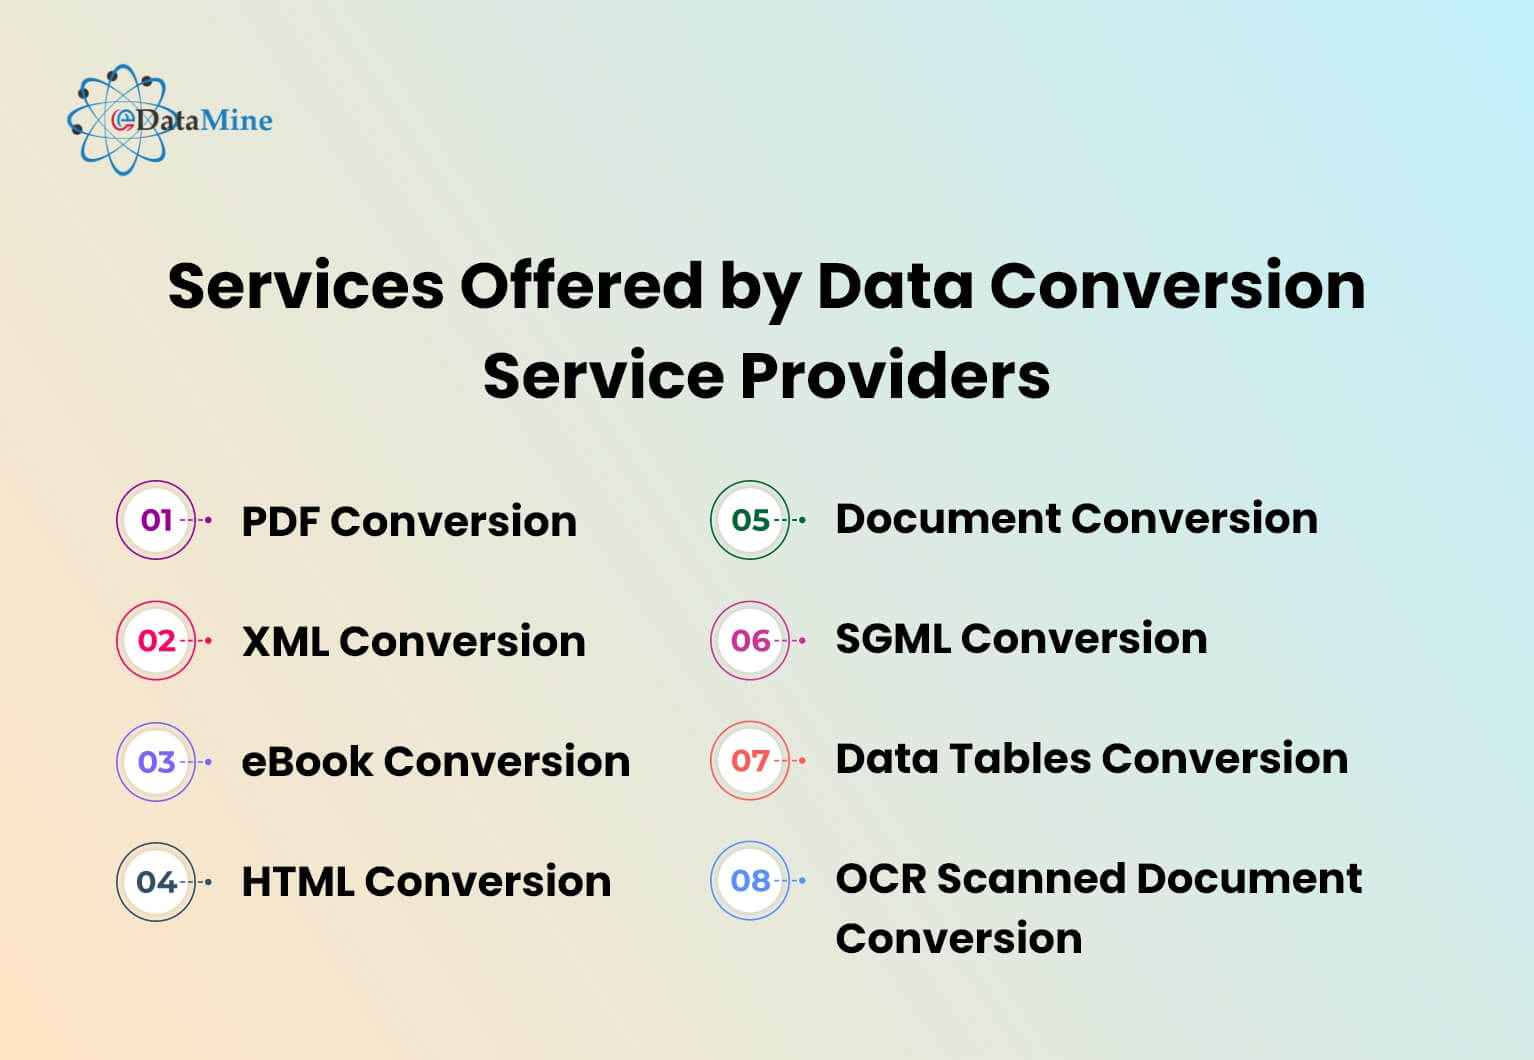 Services Offered by Data Conversion Service Providers